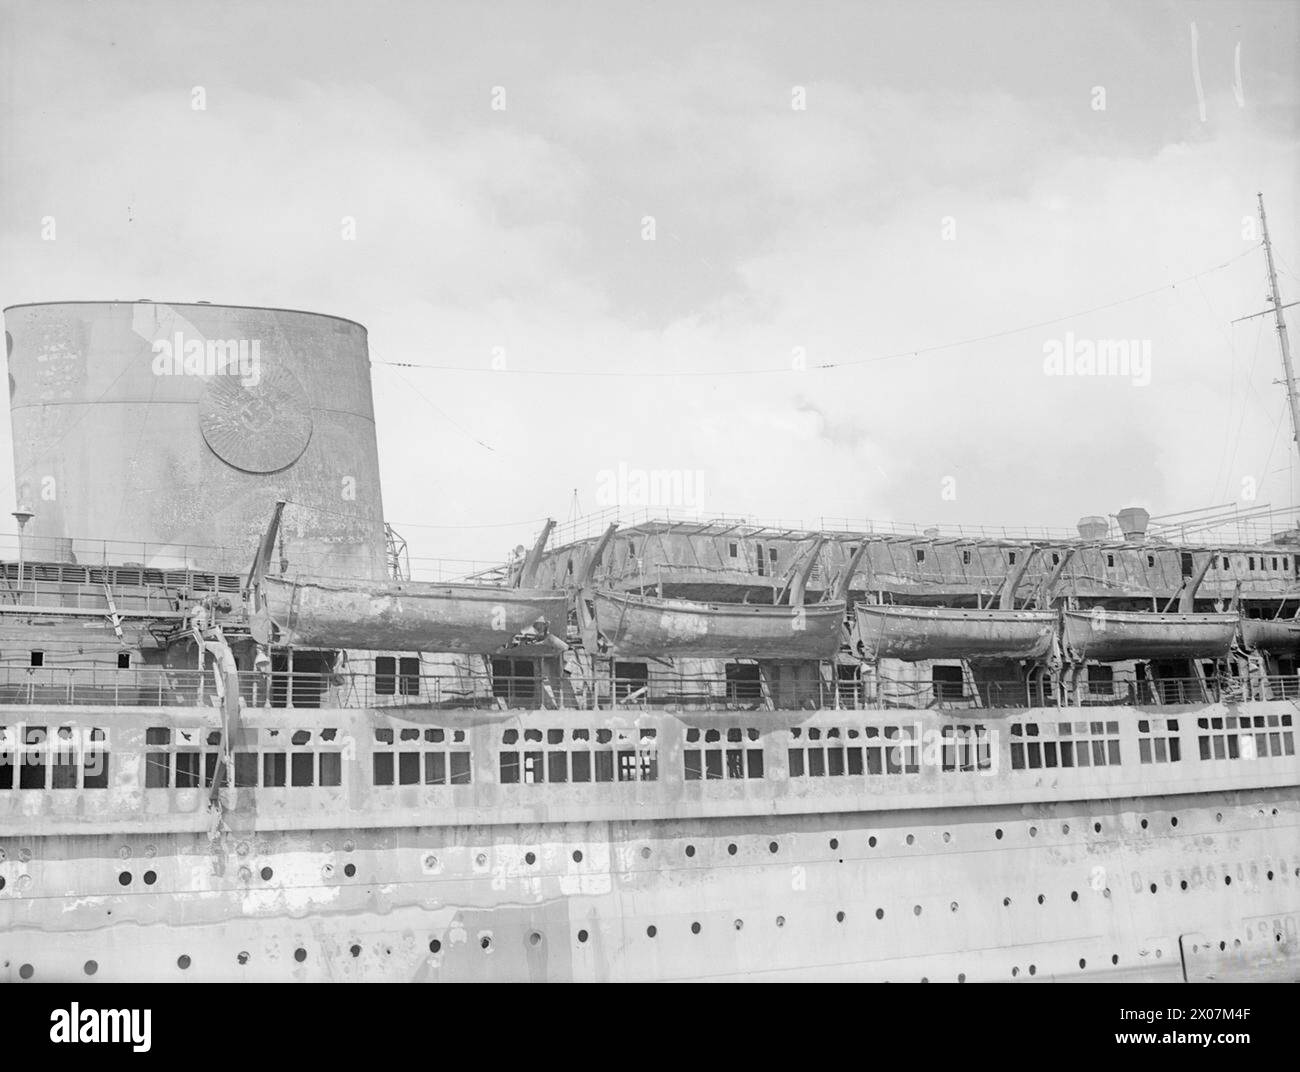 WRECKAGE IN THE BOMB-SCARRED HAMBURG DOCKS. 8 JULY 1945, WRECKED AND BURNT OUT GERMAN SHIPPING IN THE BOMB-BATTERED DOCKS AT HAMBURG. - The war scarred ROBERT LEY, 'strength through joy' ship Stock Photo